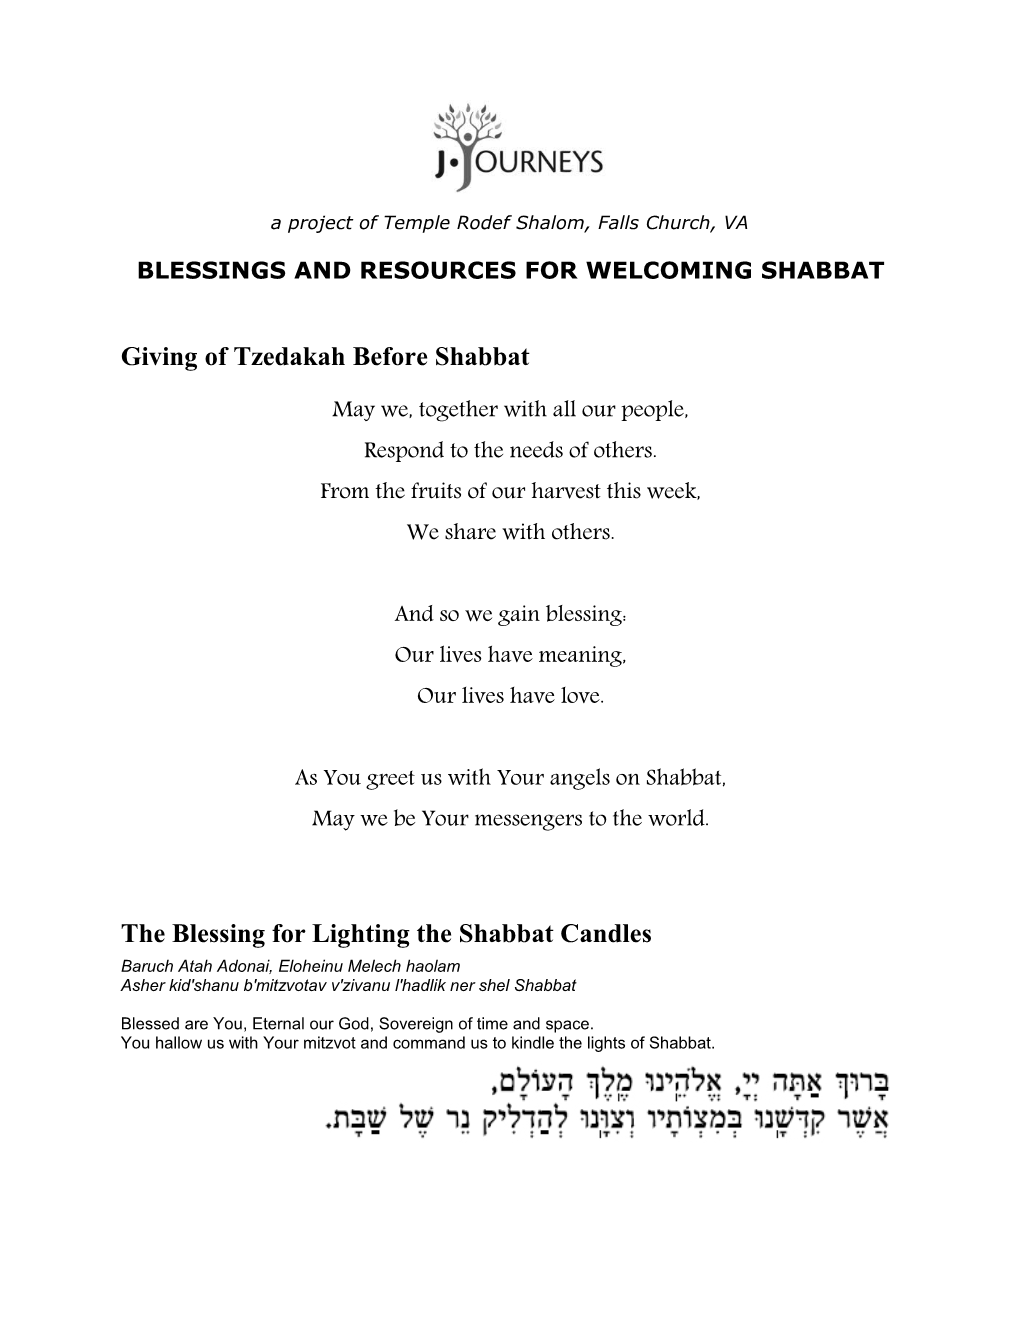 Blessings and Resources for Welcoming Shabbat